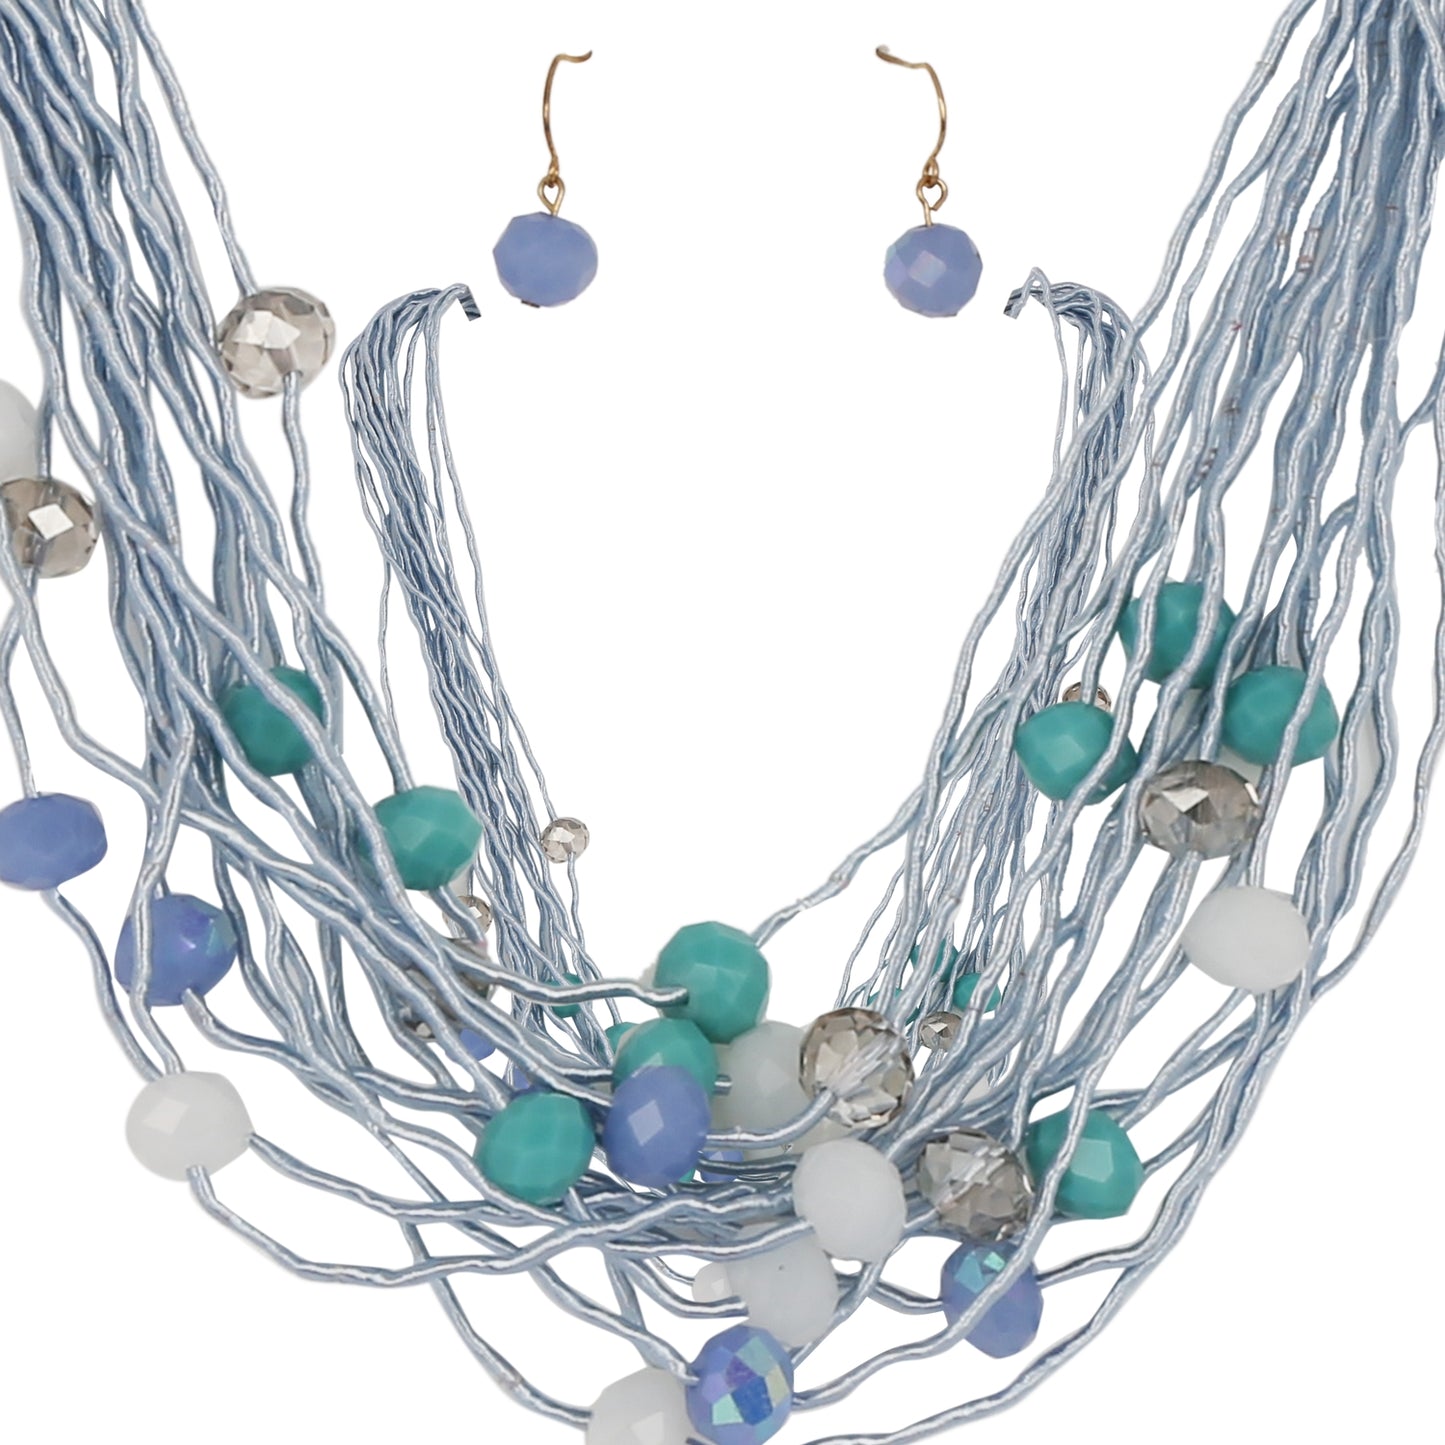 BLUE BEADS NECKLACE WITH PAIR OF EARRINGS - Coral Tree 